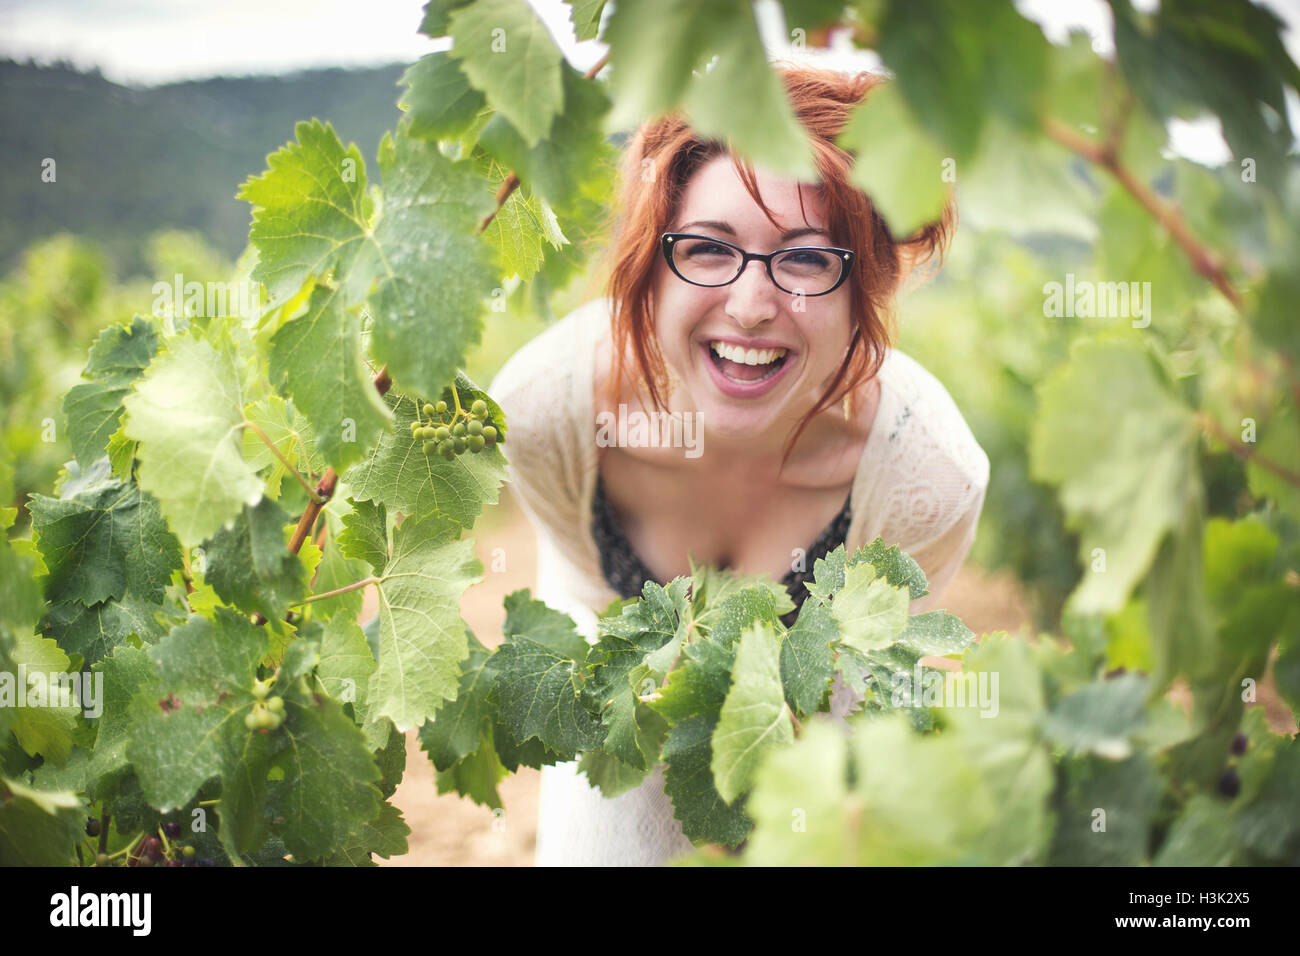 Young woman peering through vines, laughing, Boutenac, France Stock Photo